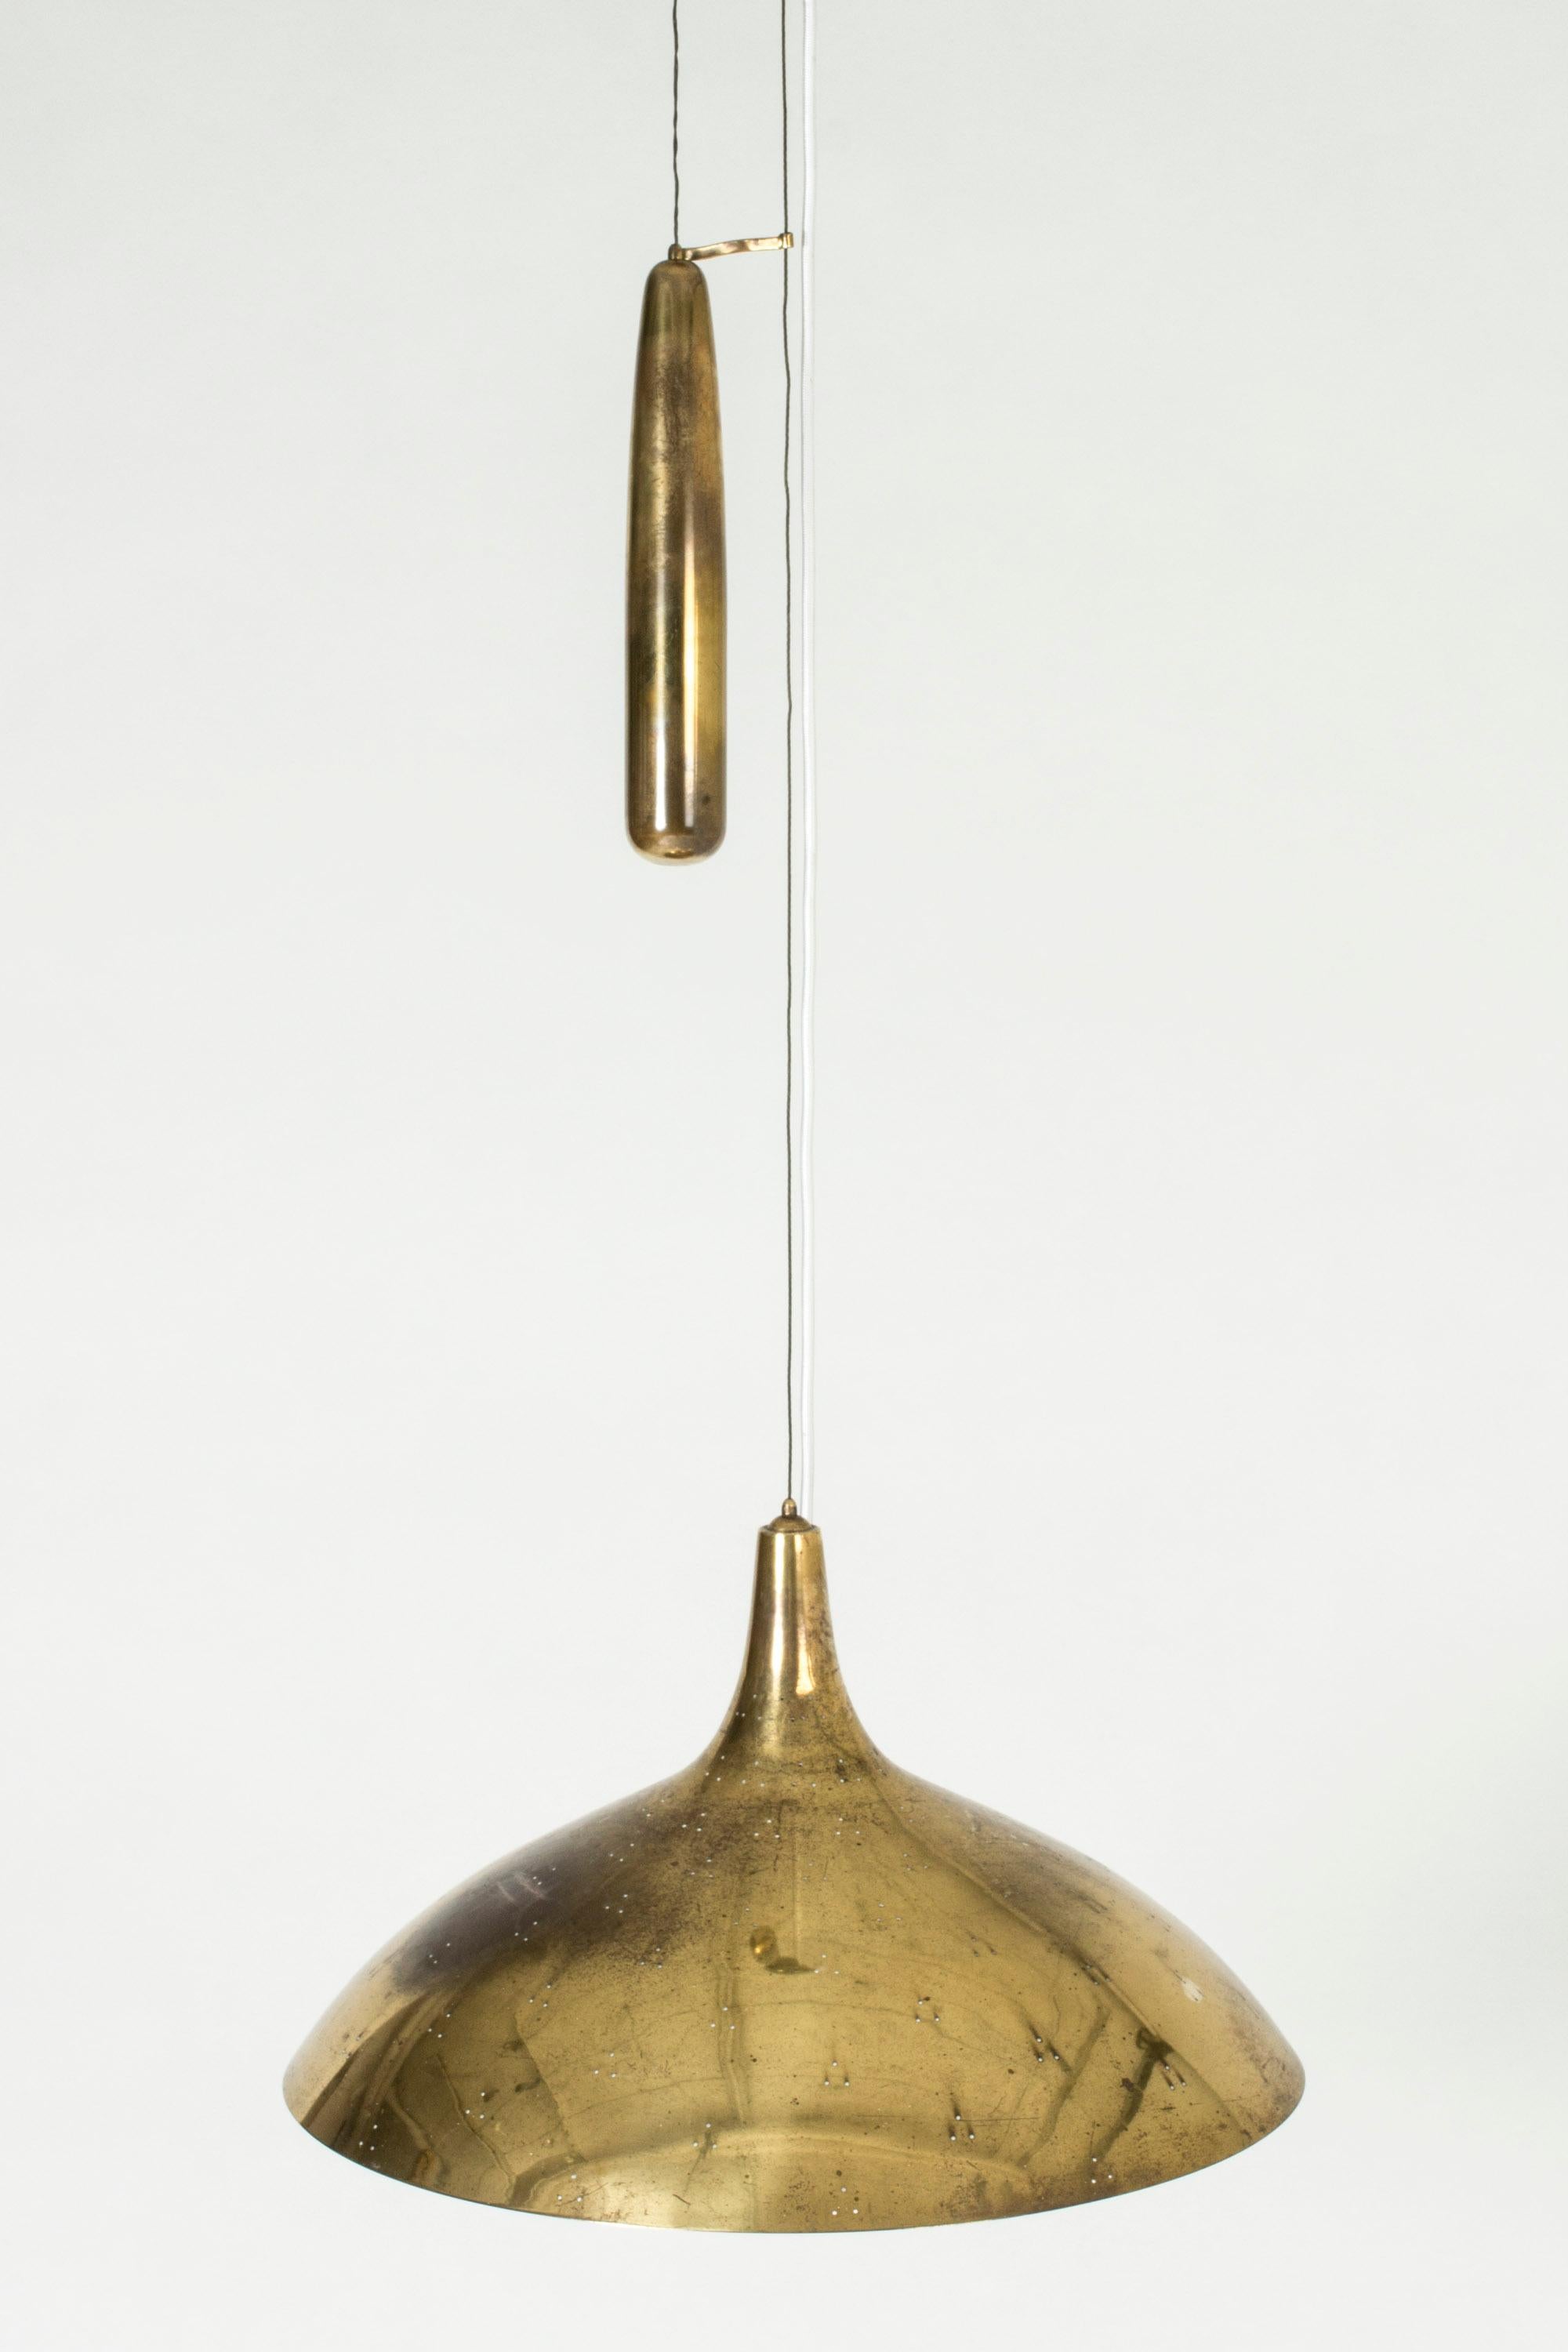 Finnish Midcentury Pendant Lamp by Paavo Tynell for Taito Oy, Finland, 1950s